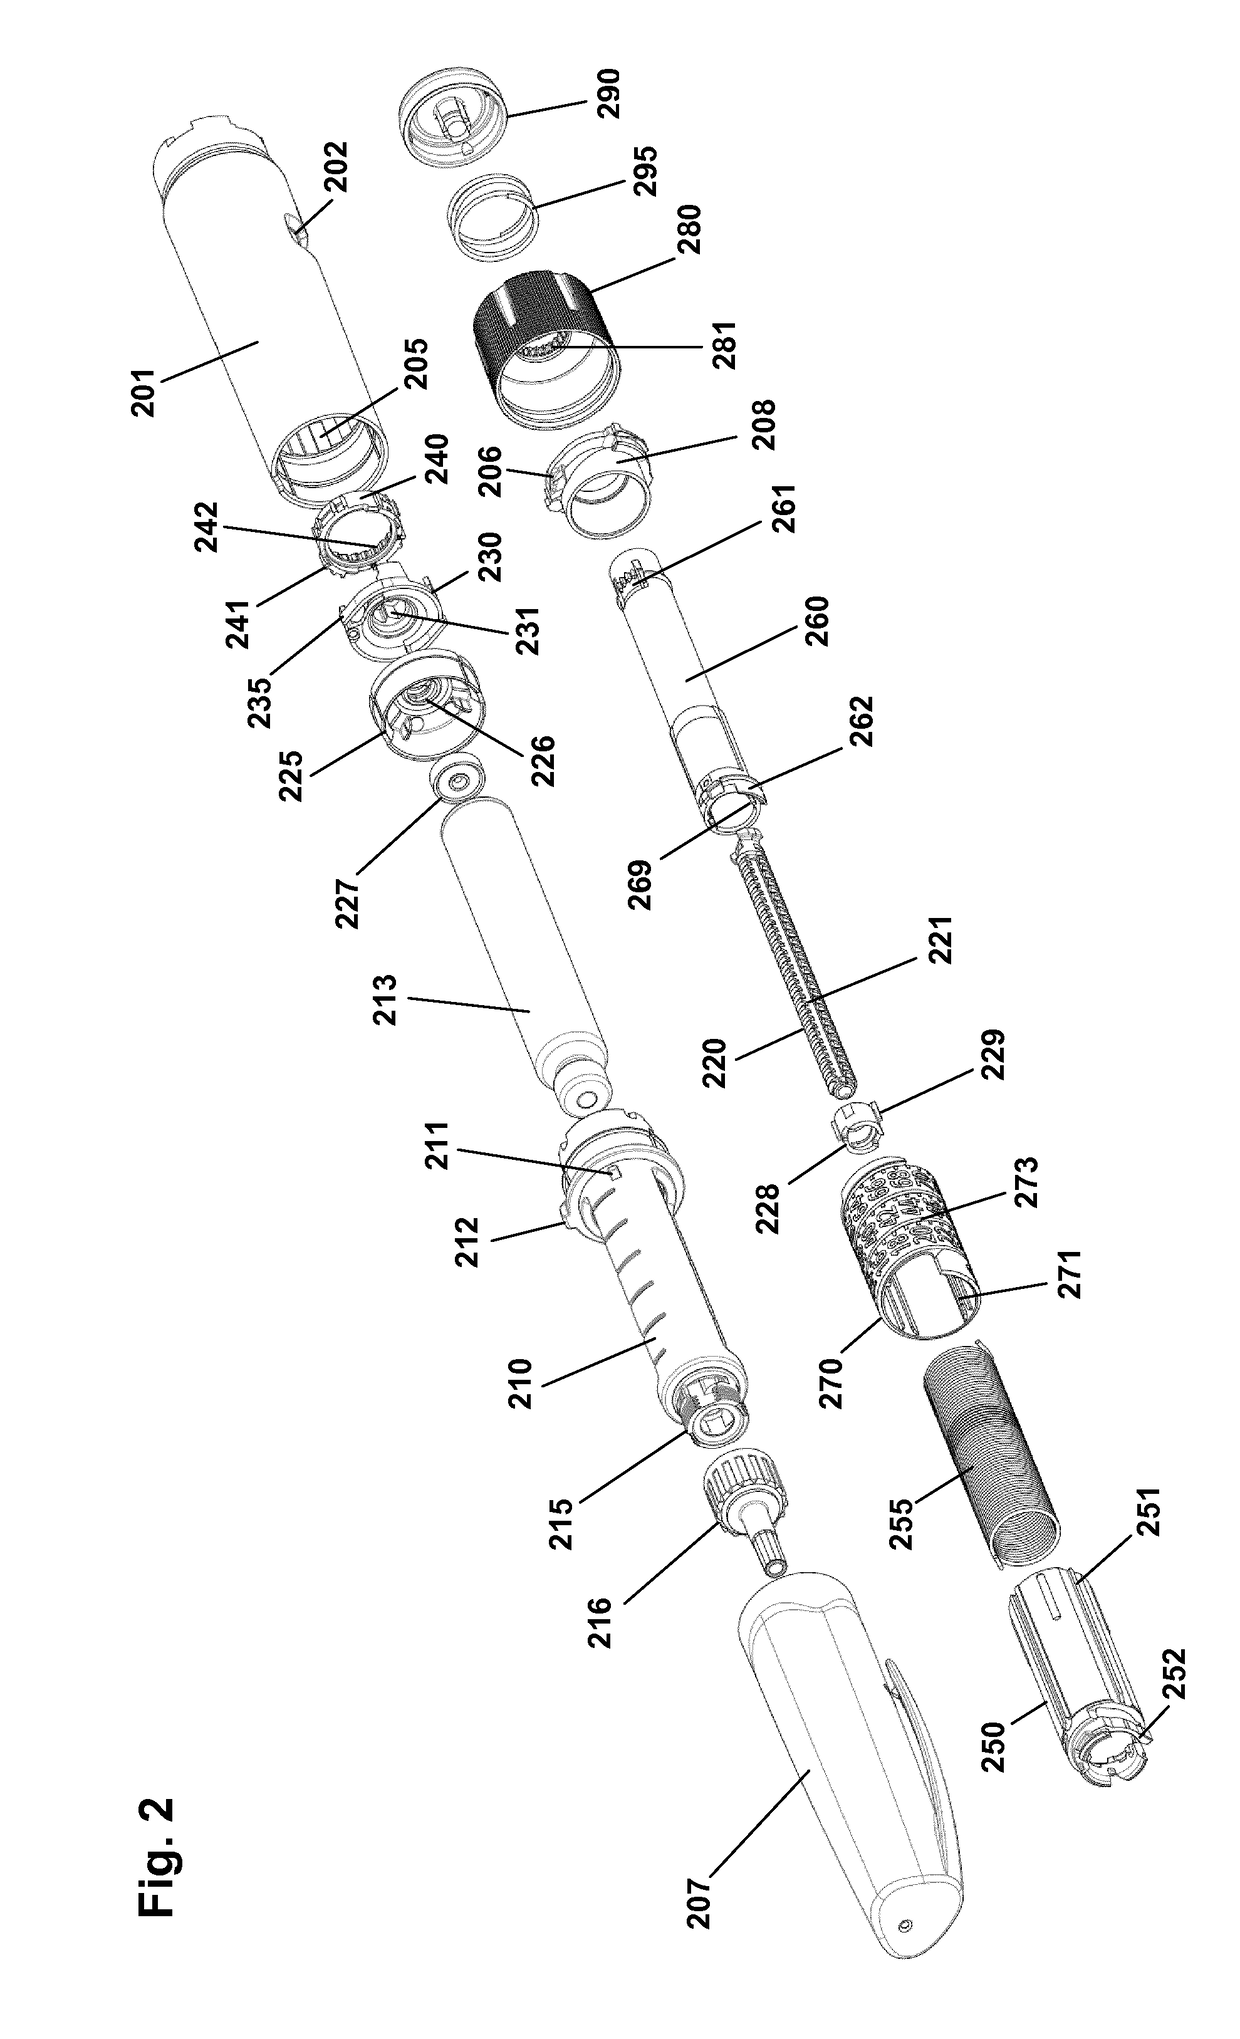 Pen-type drug injector and add-on module with magnetic dosage sensor system and error detection